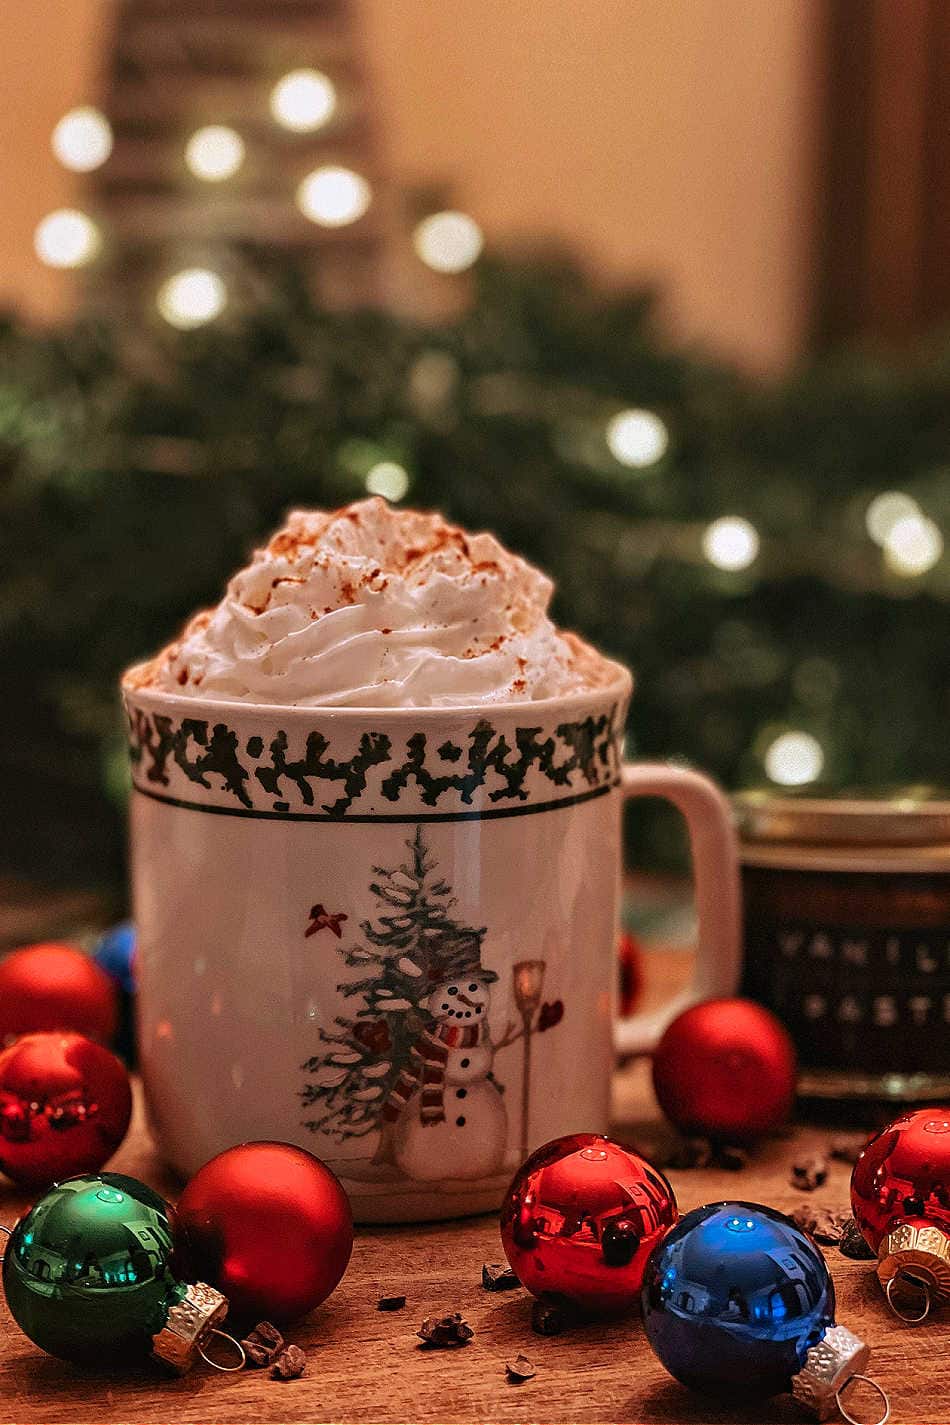 Herbal Adaptogen Vanilla Hot Cocoa | Growing Up Herbal | Herbal adaptogens and classic vanilla and chocolate flavors star in this seasonal, stress-supporting vanilla hot cocoa recipe!